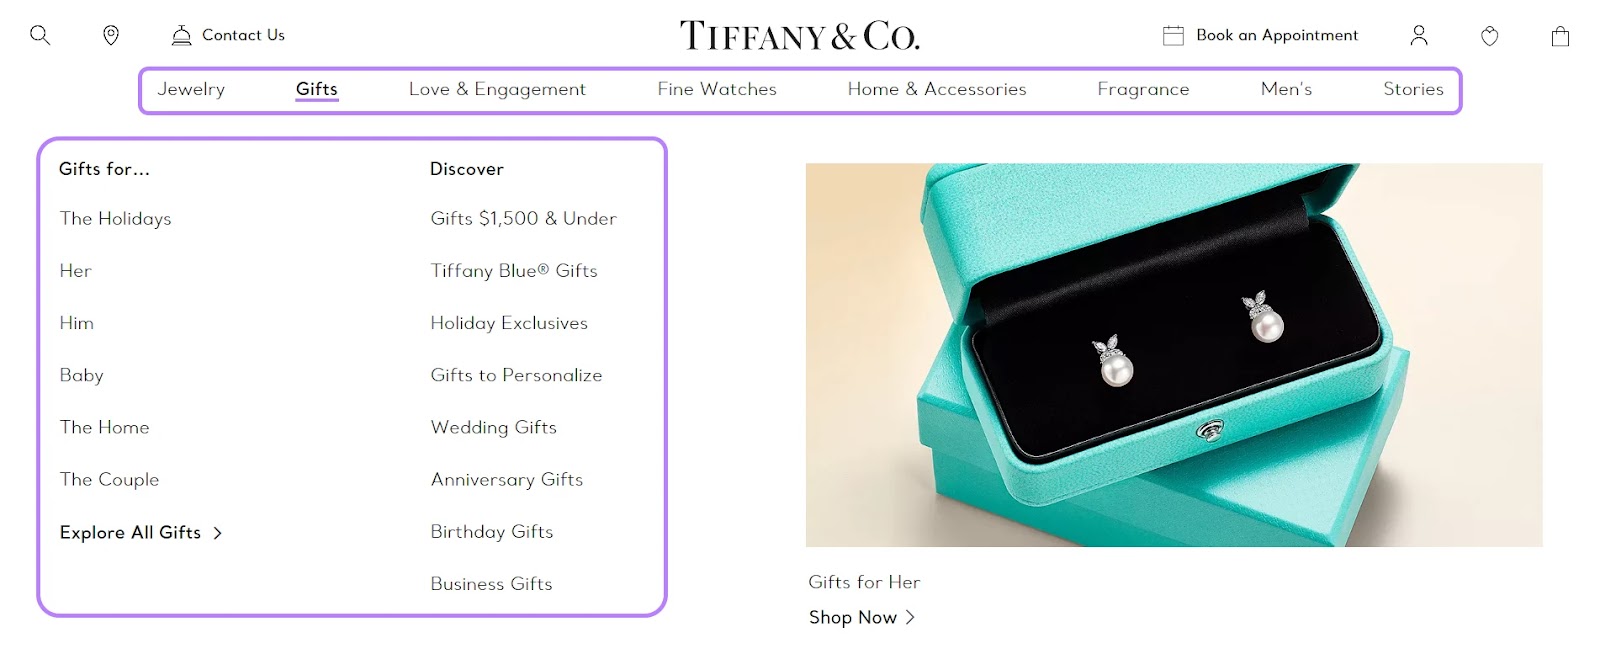 Tiffany & Co's website navigation, combining a horizontal navigation with a drop-down navigation